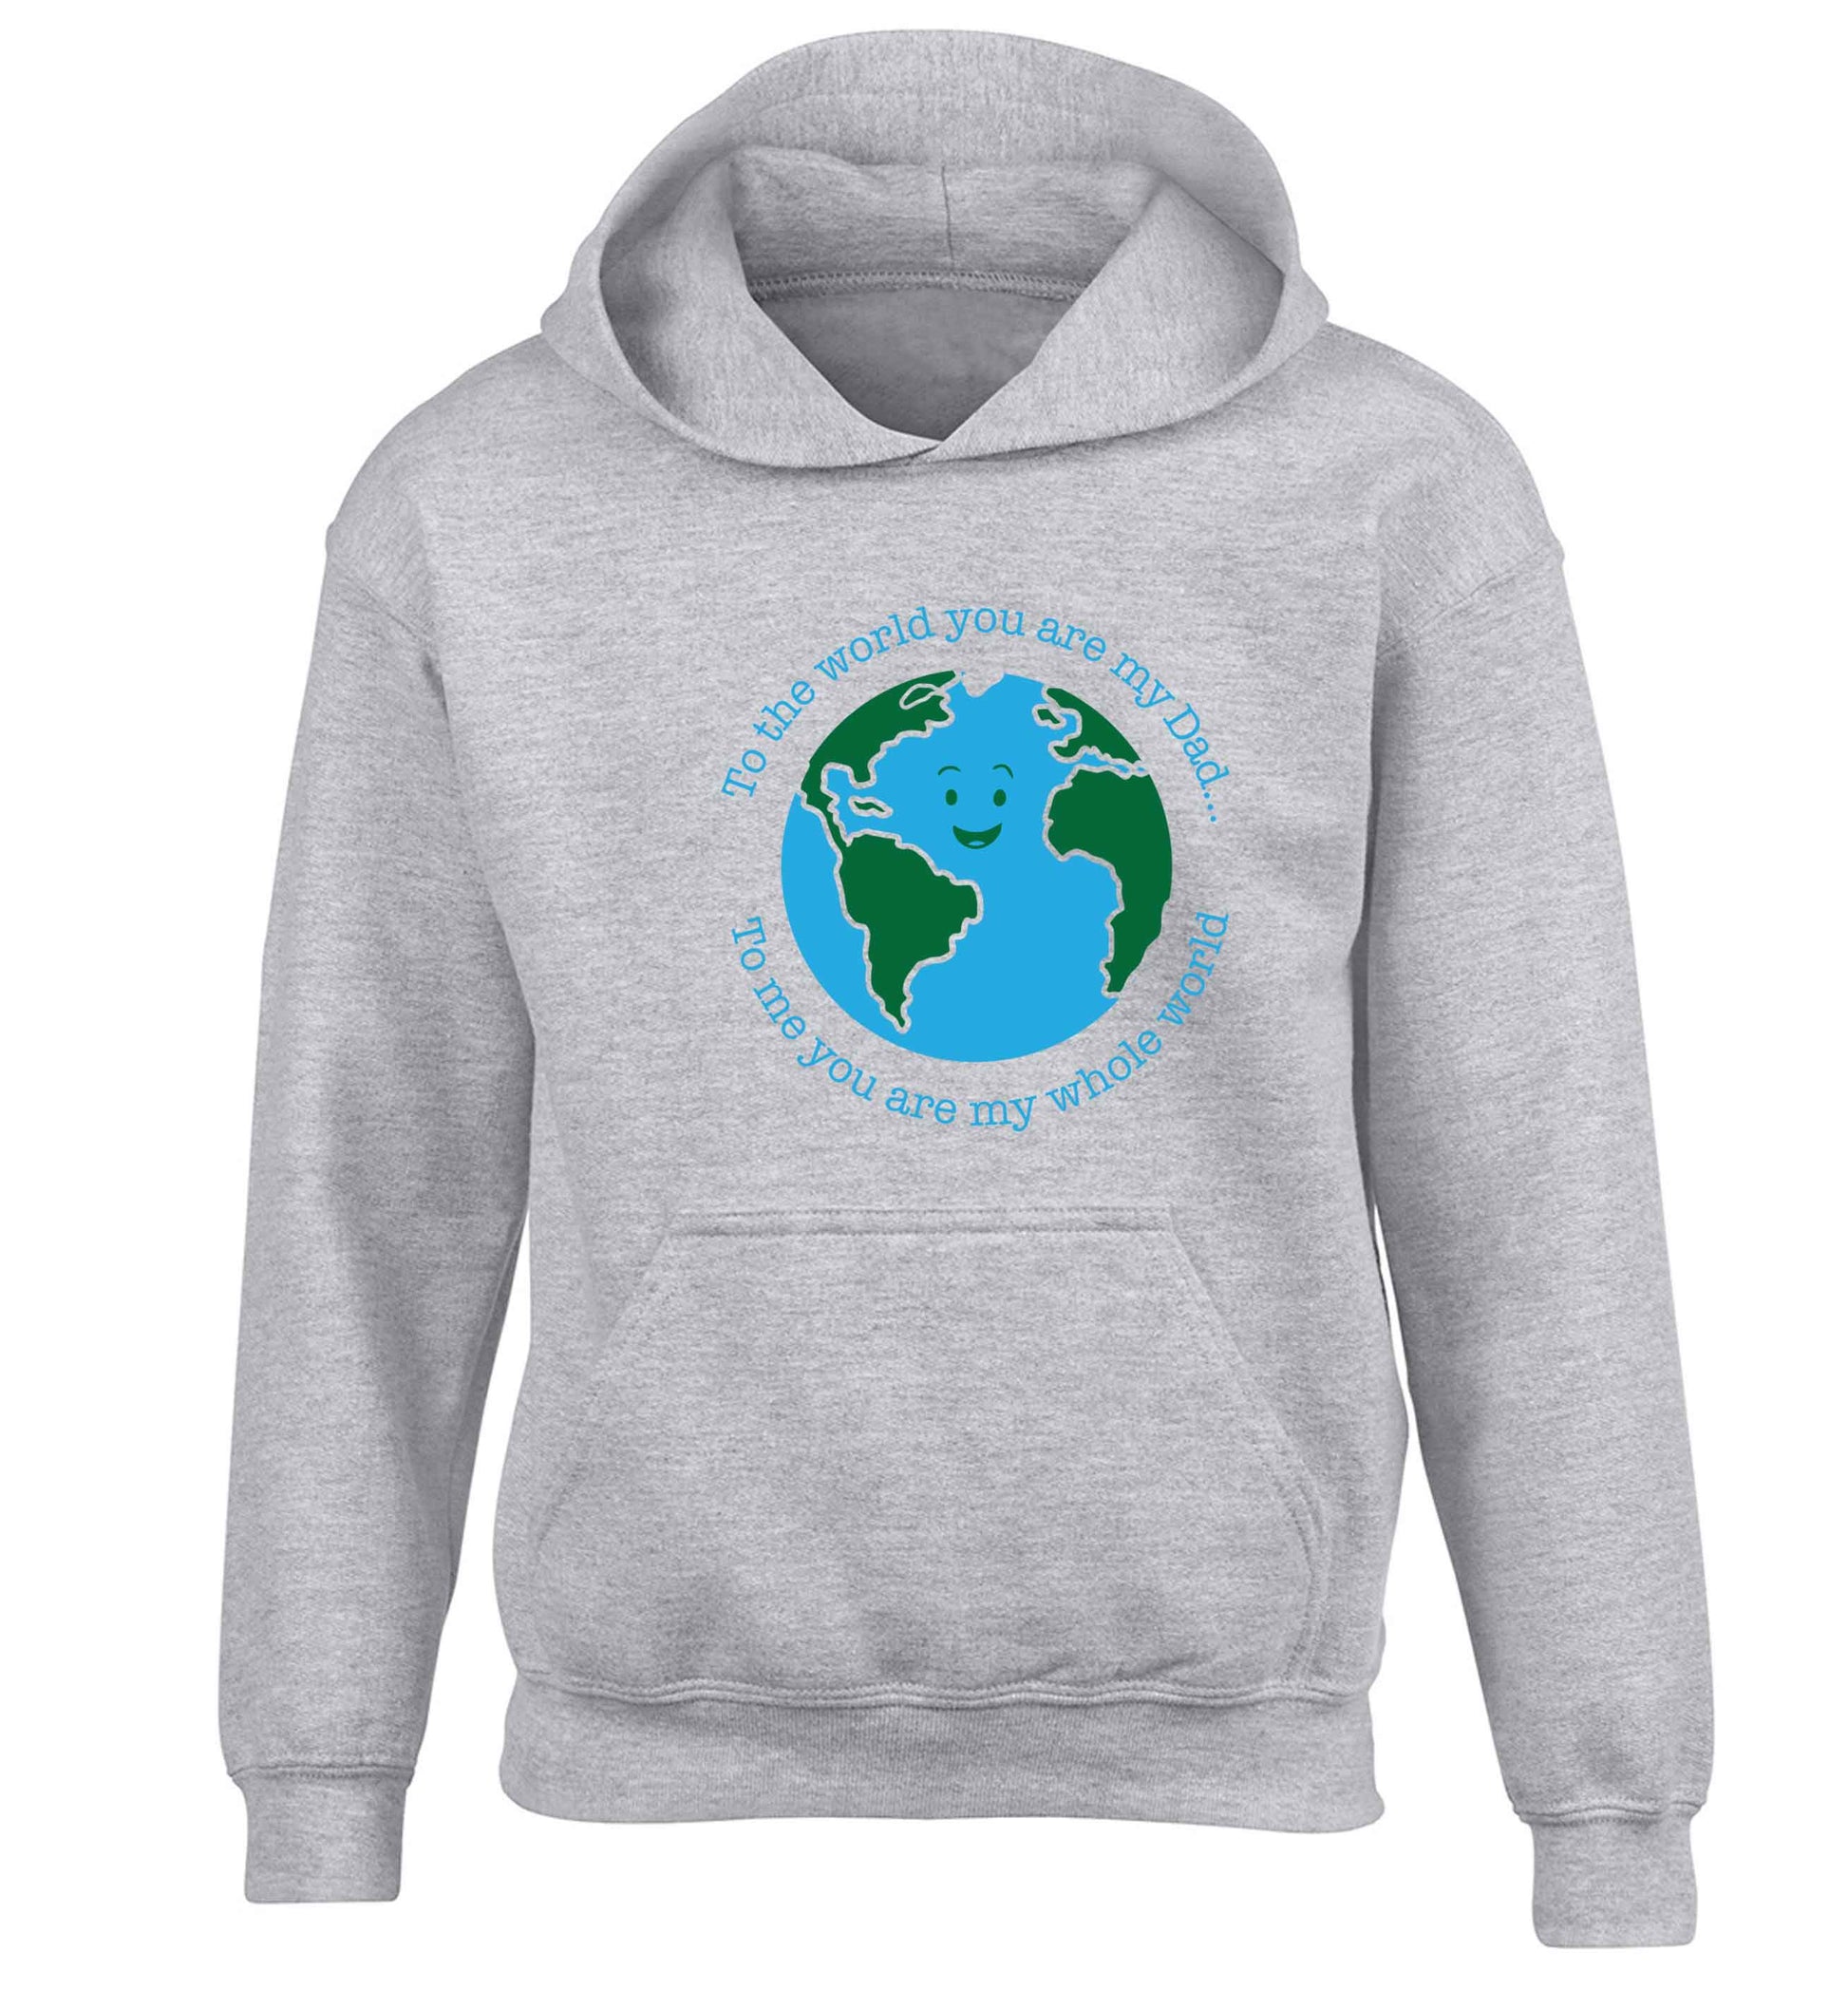 To the world you are my dad, to me you are my whole world children's grey hoodie 12-13 Years